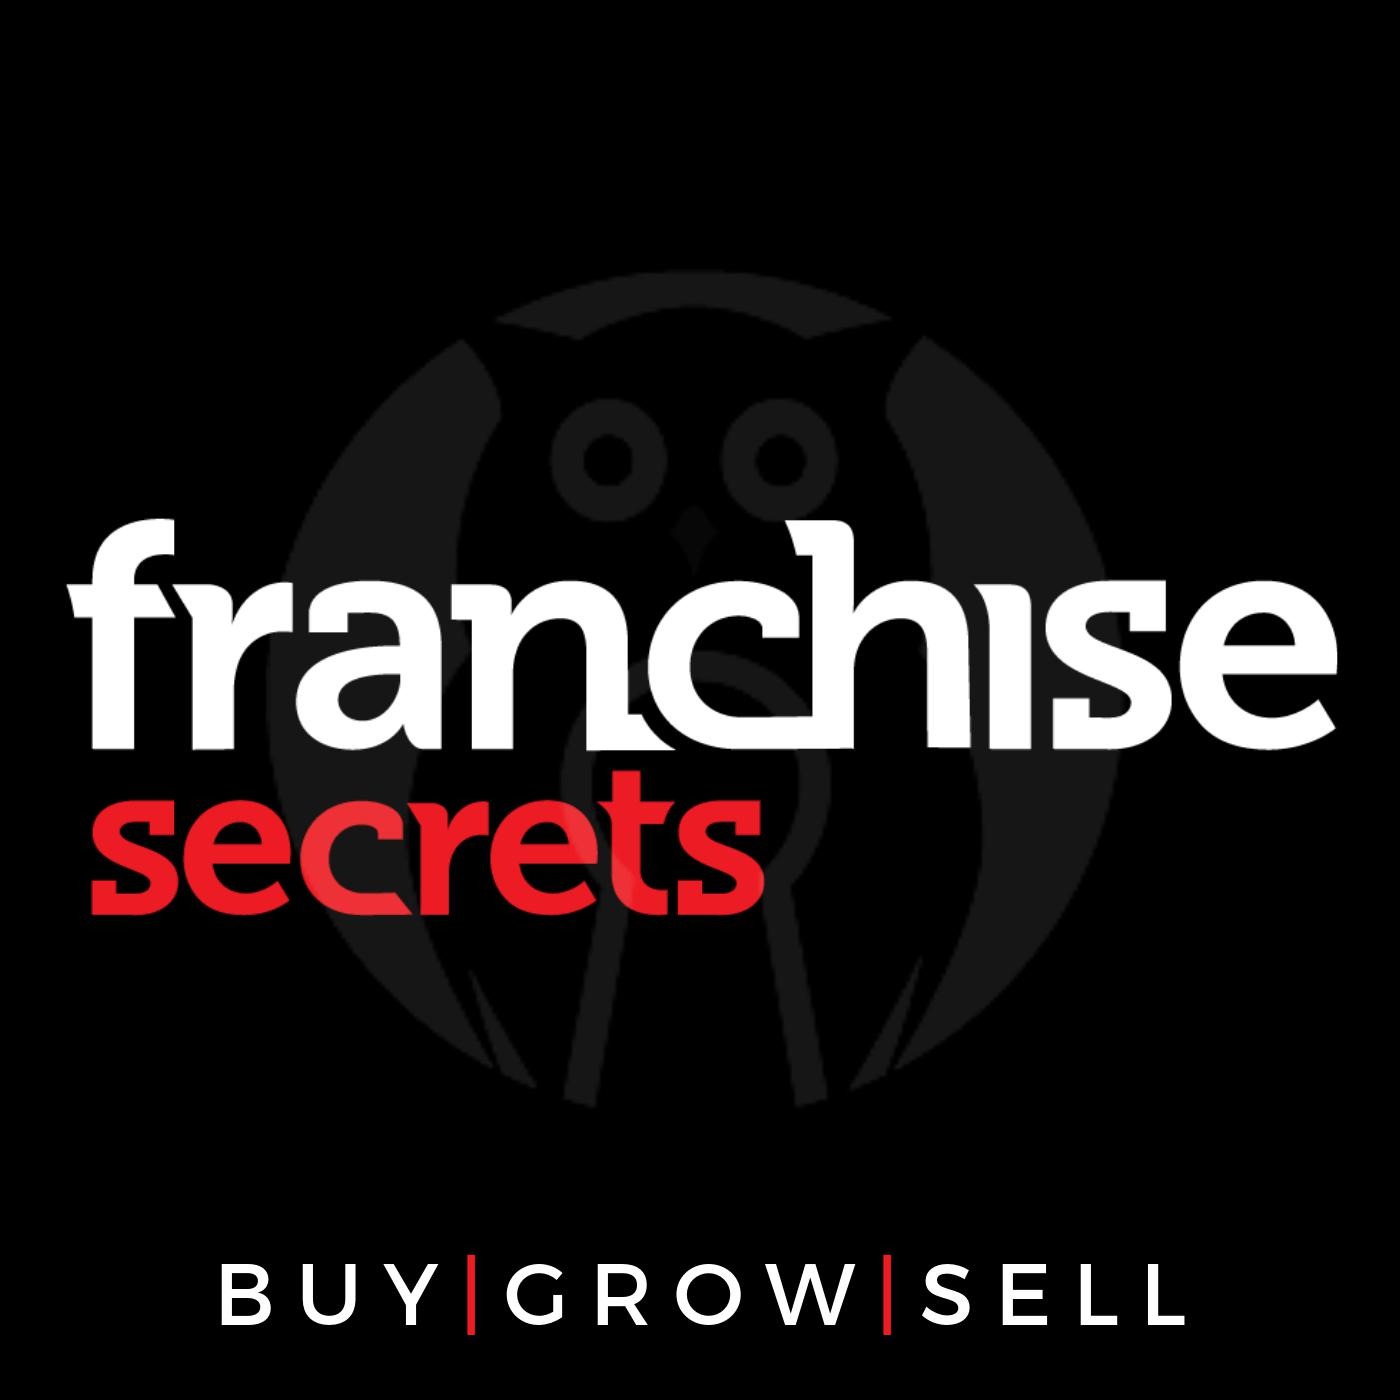 INTERVIEW | You Can Only Be Aware of That Which Vibrates Equal to or Less Than You on the Franchise Secrets Podcast